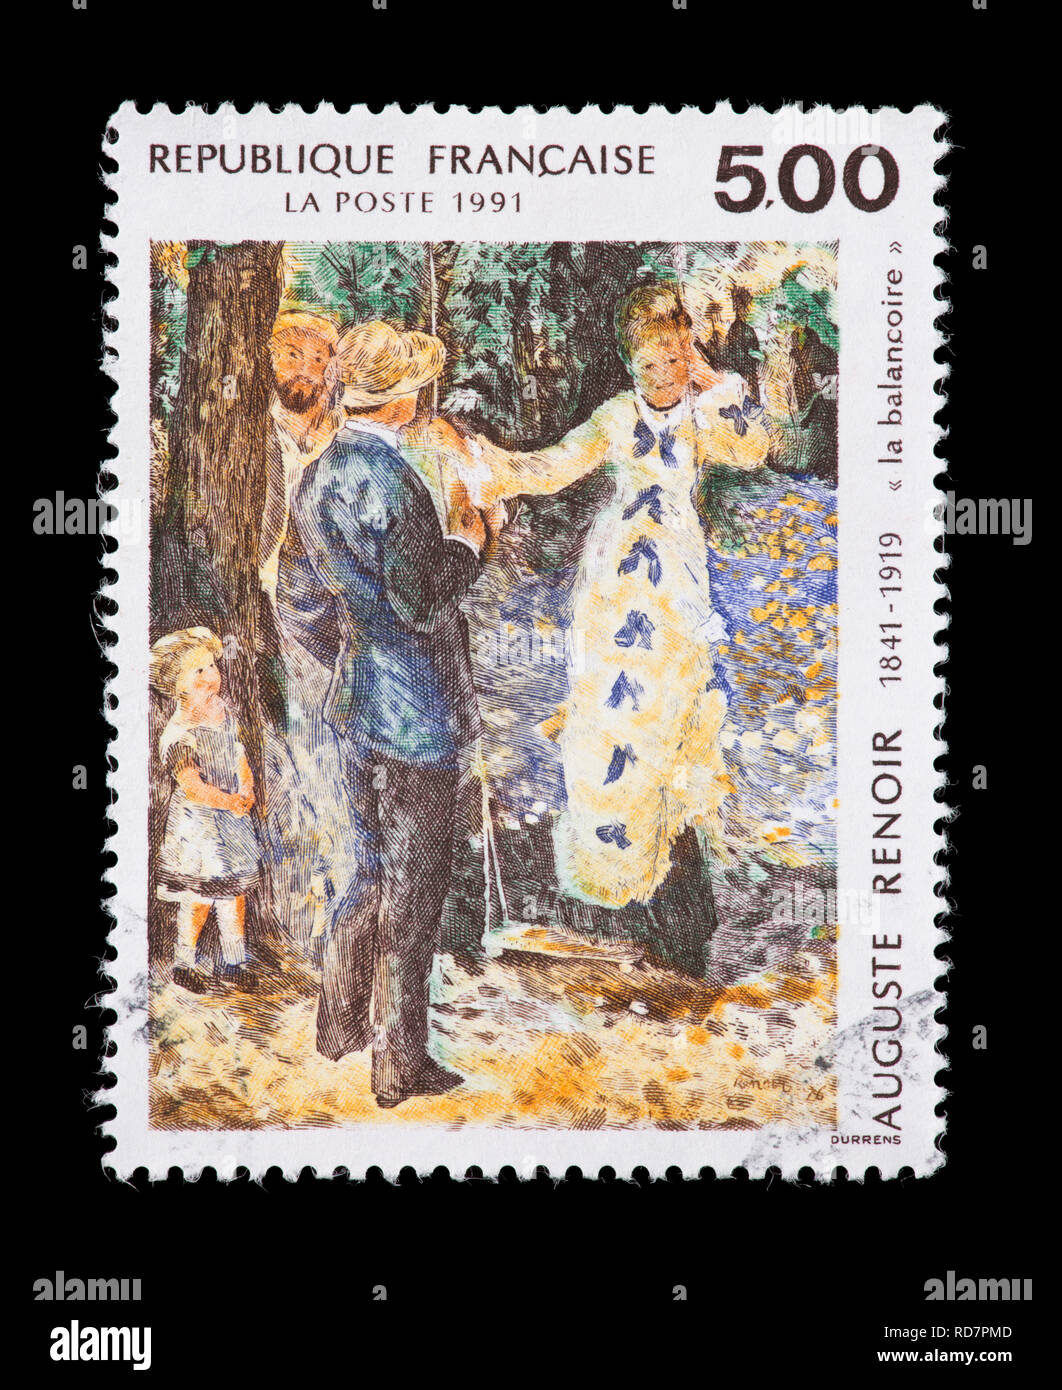 Postage stamp from France depicting the Auguste Renoir painter The Swing Stock Photo